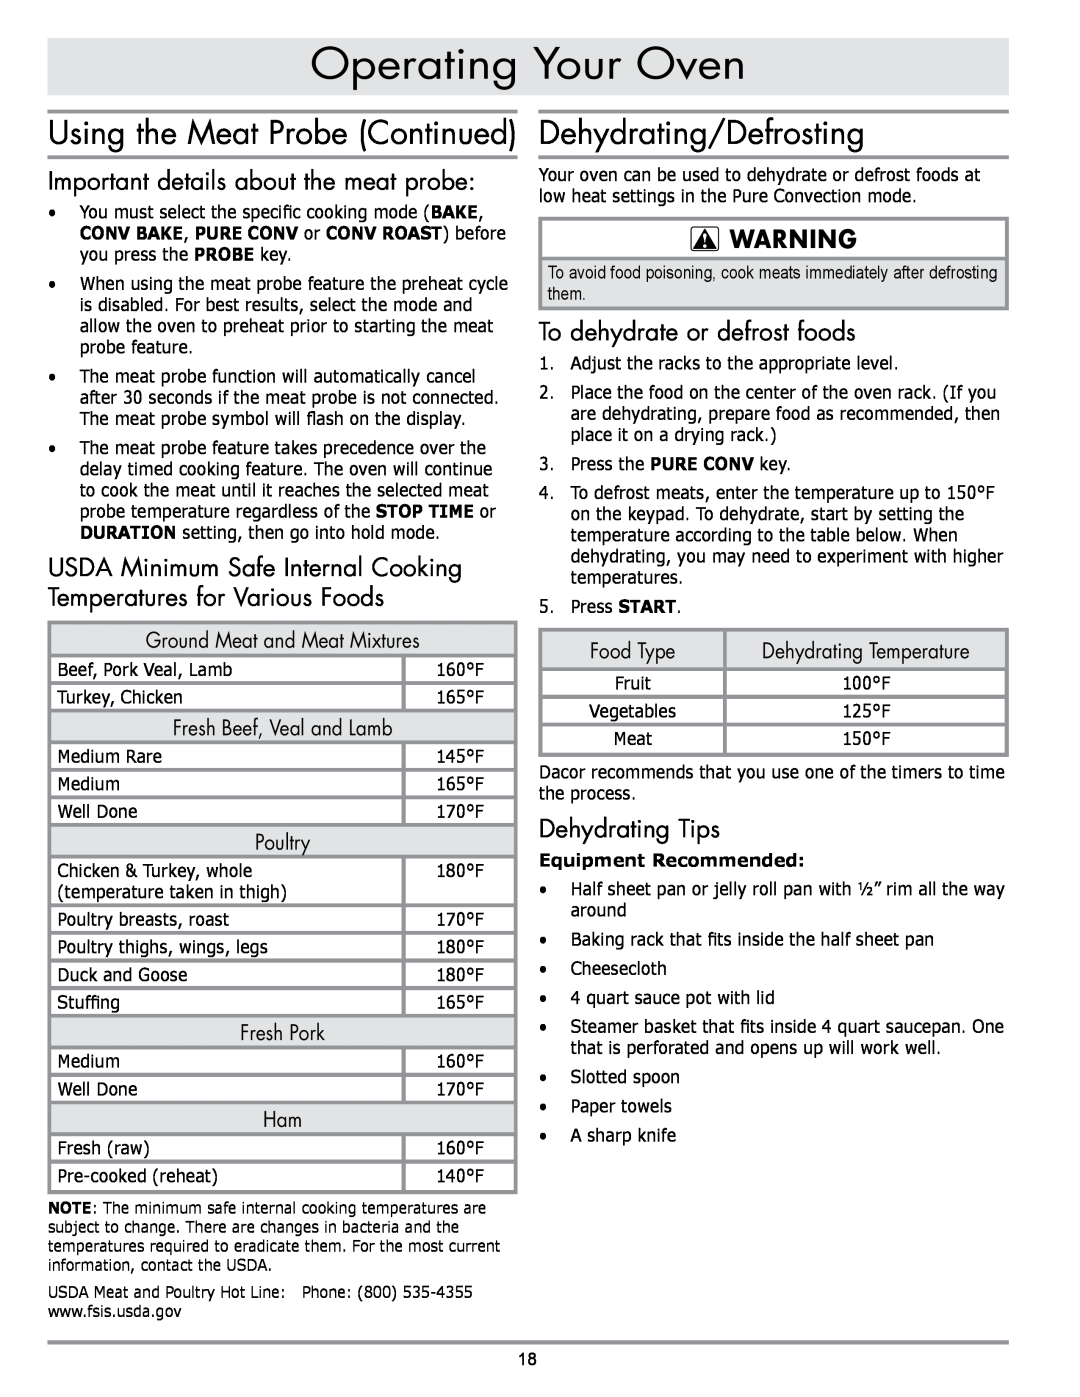 Sears EORD230 manual Using the Meat Probe Continued Dehydrating/Defrosting, Important details about the meat probe, Poultry 